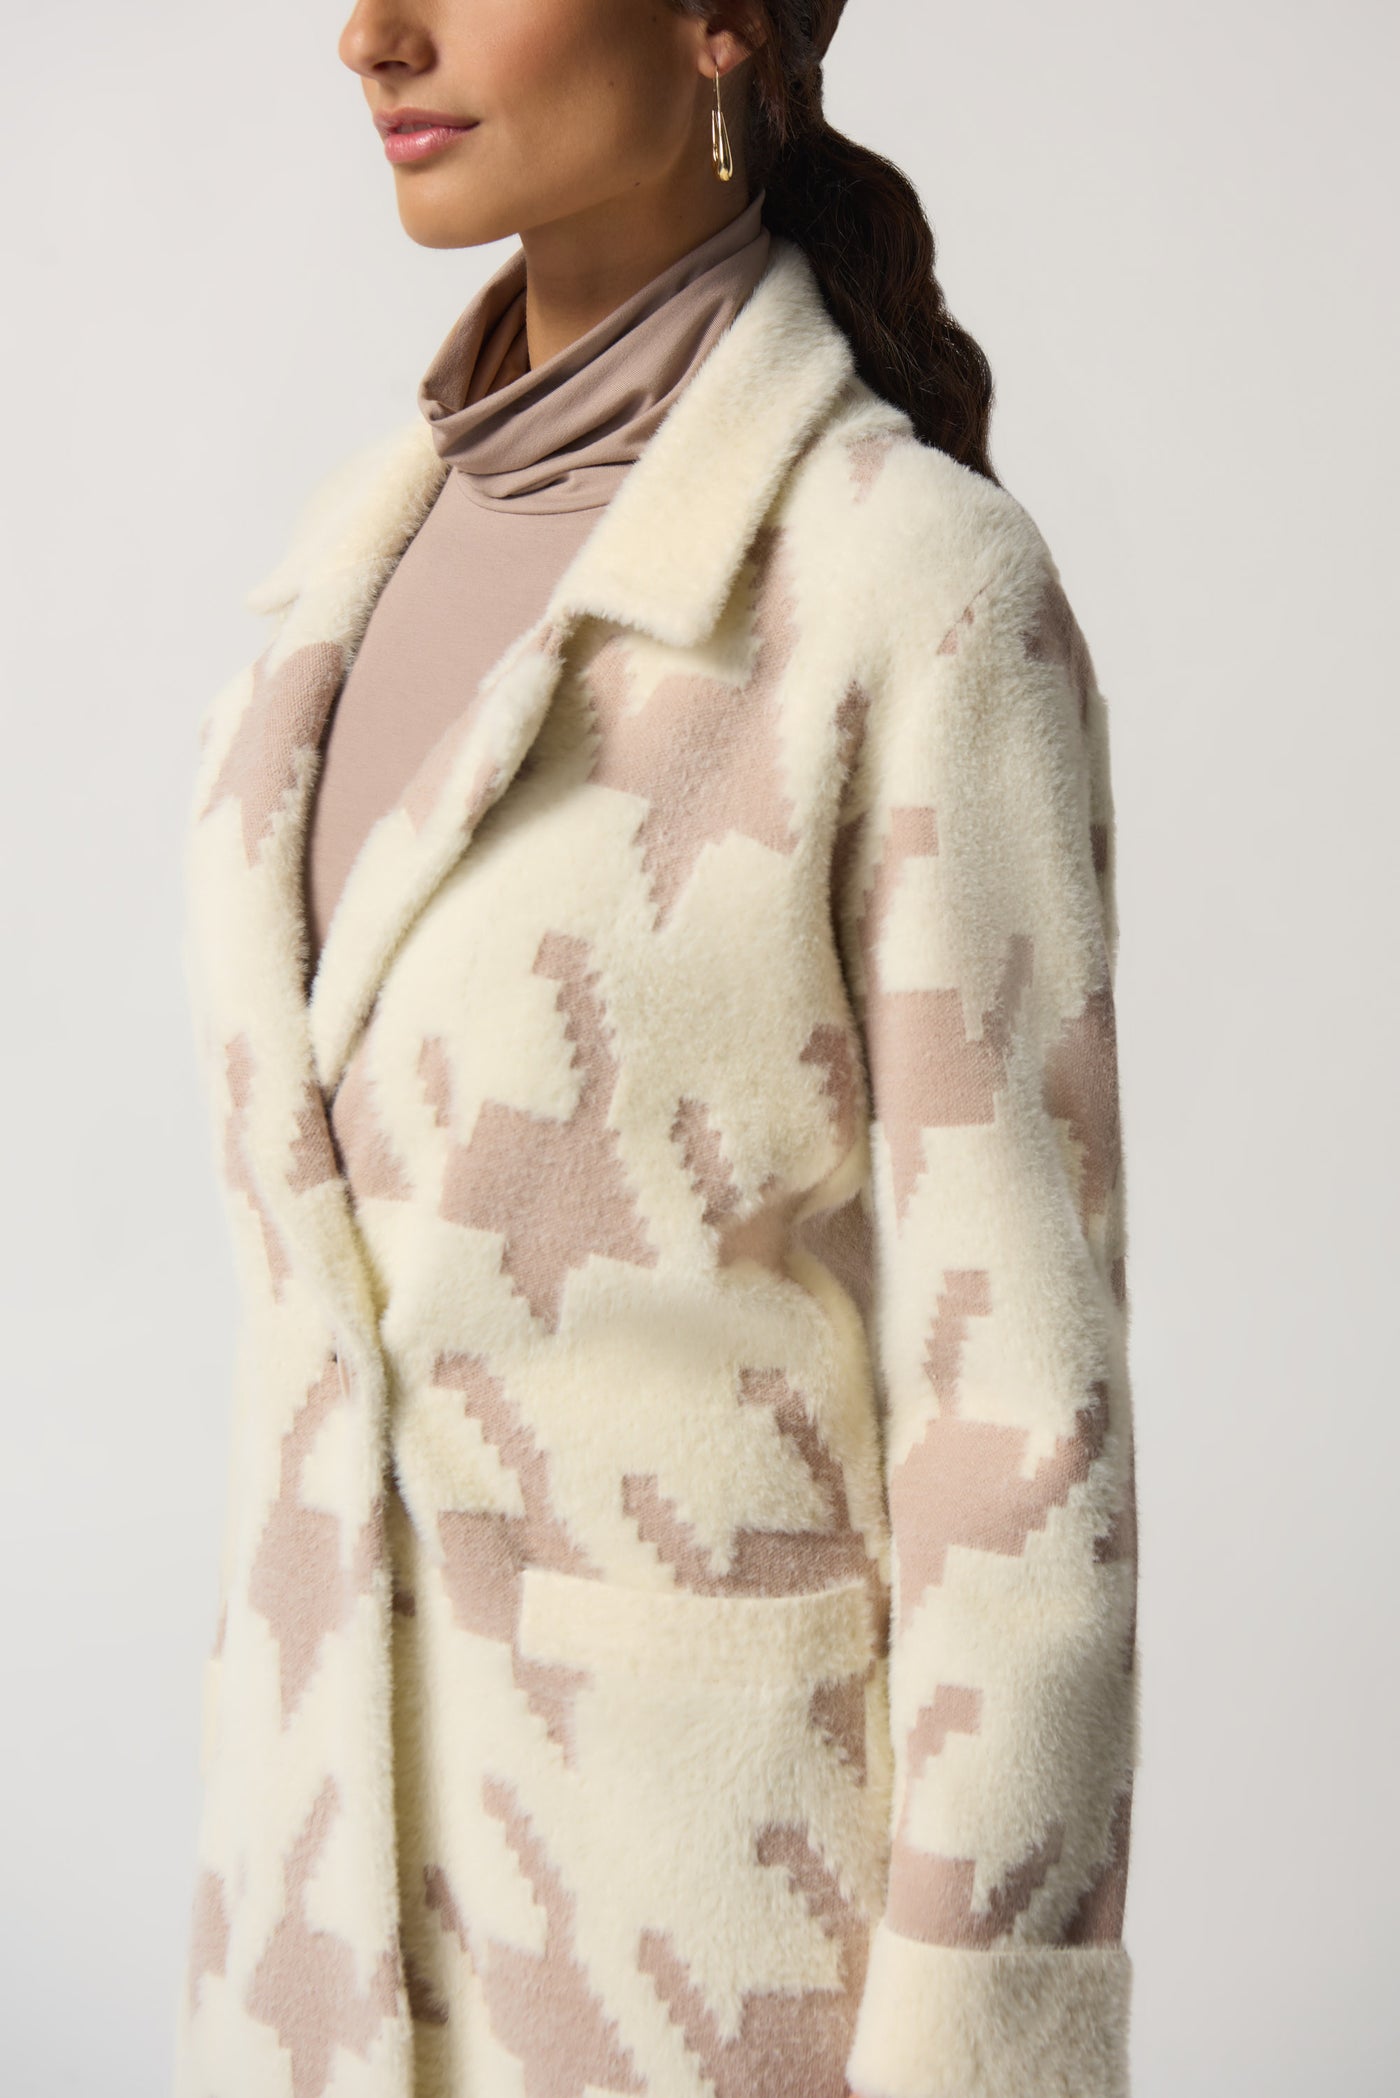 Warm Wishes Houndstooth Coat, Winter White